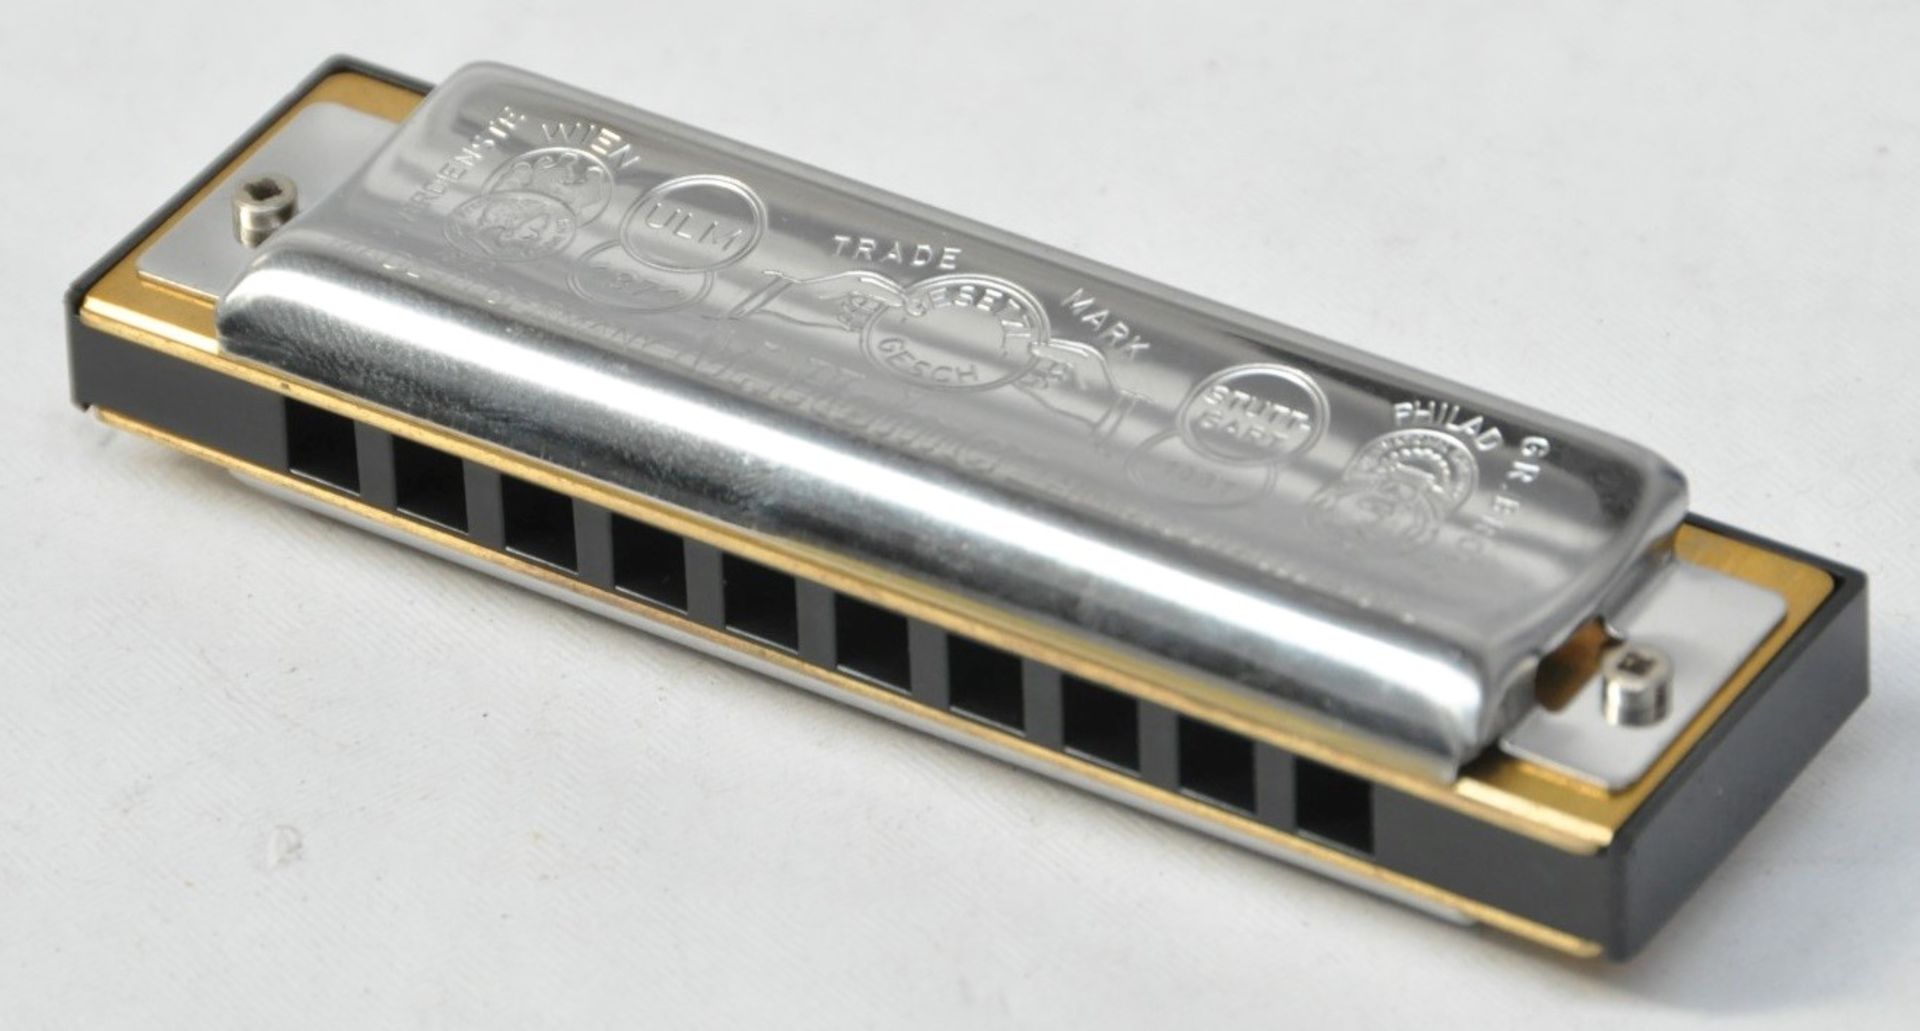 1 x Hohner Big River Harp Mouth Harmonica - Made in Germany - Key G - CL020 - Ref Pro89 - Unused - Image 5 of 5